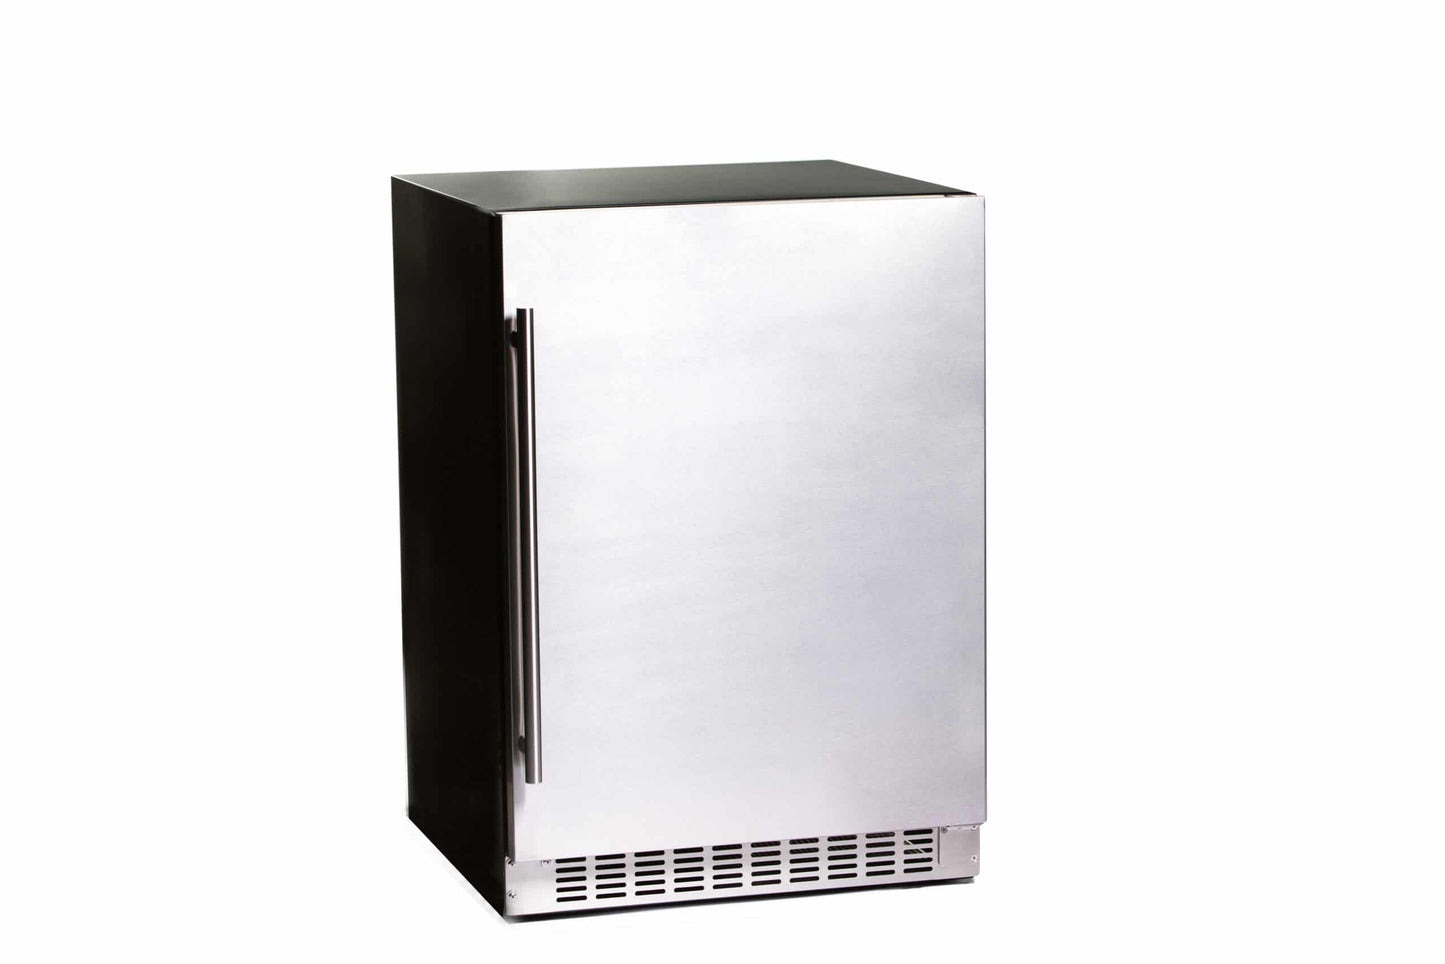 Azure Home Products A224RS Refrigerator 2.0 Indoor/Outdoor